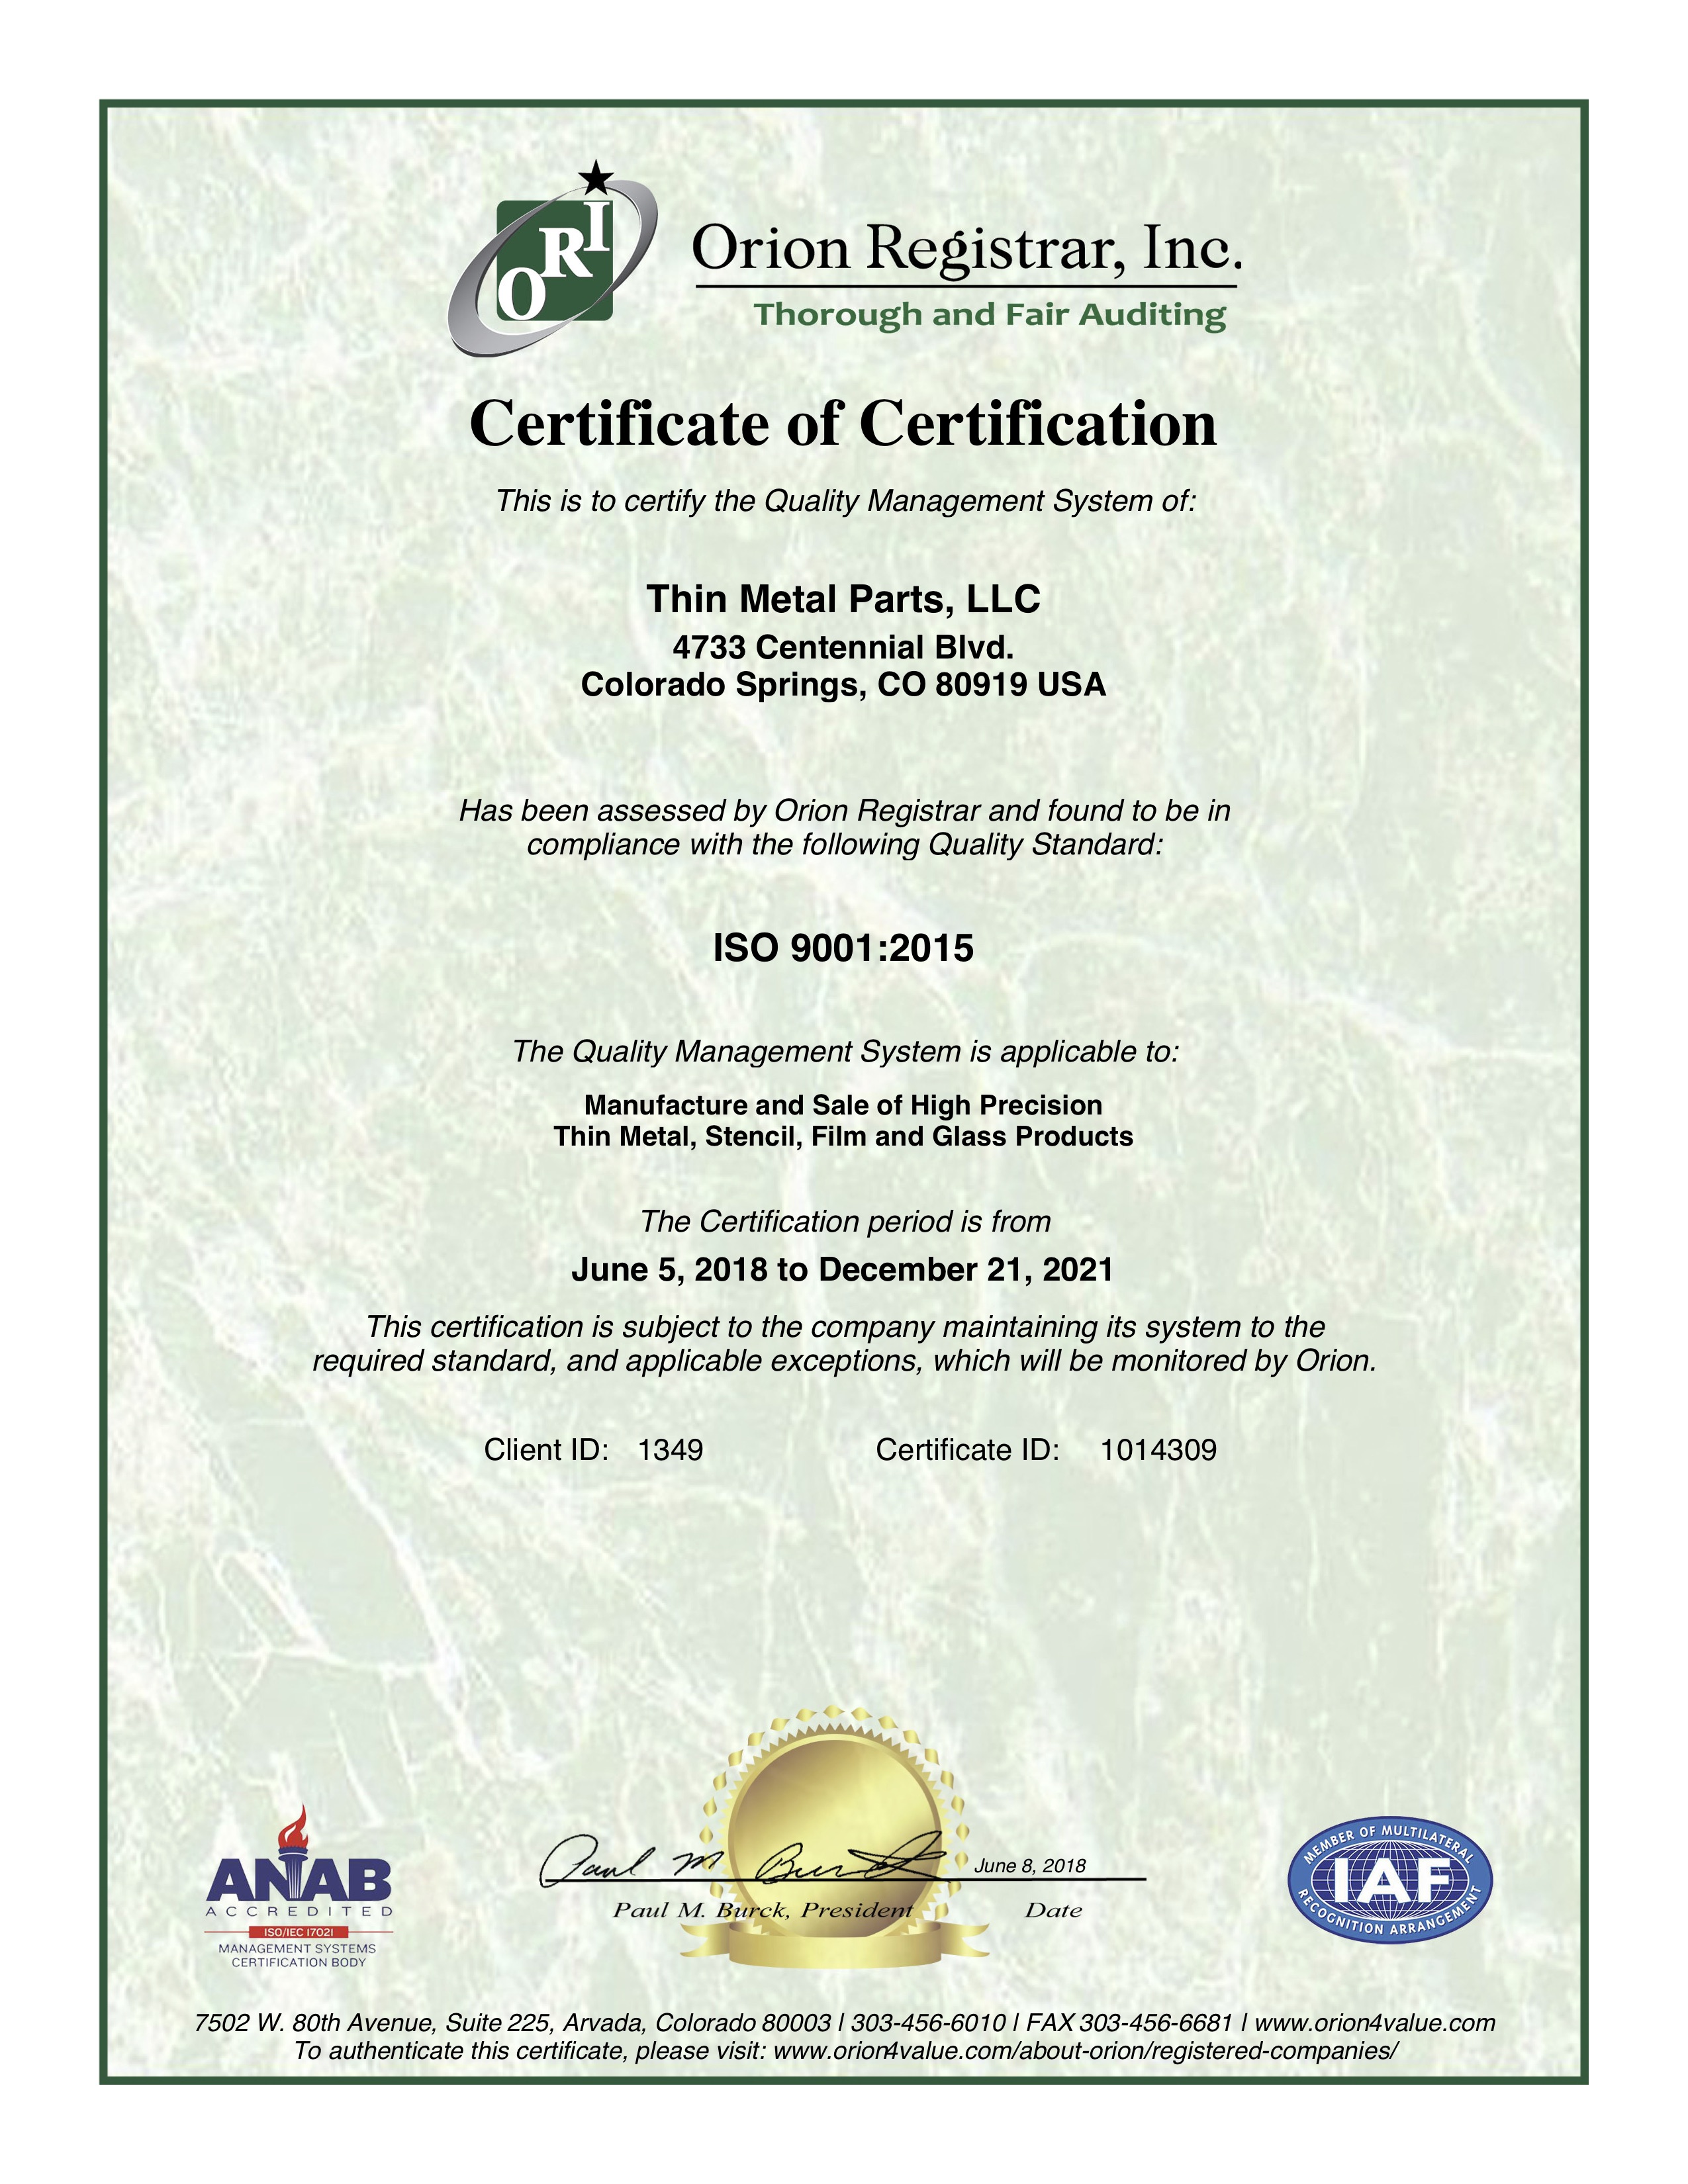 Thin Metal Parts ISO 9001 Certificate for Quality Control